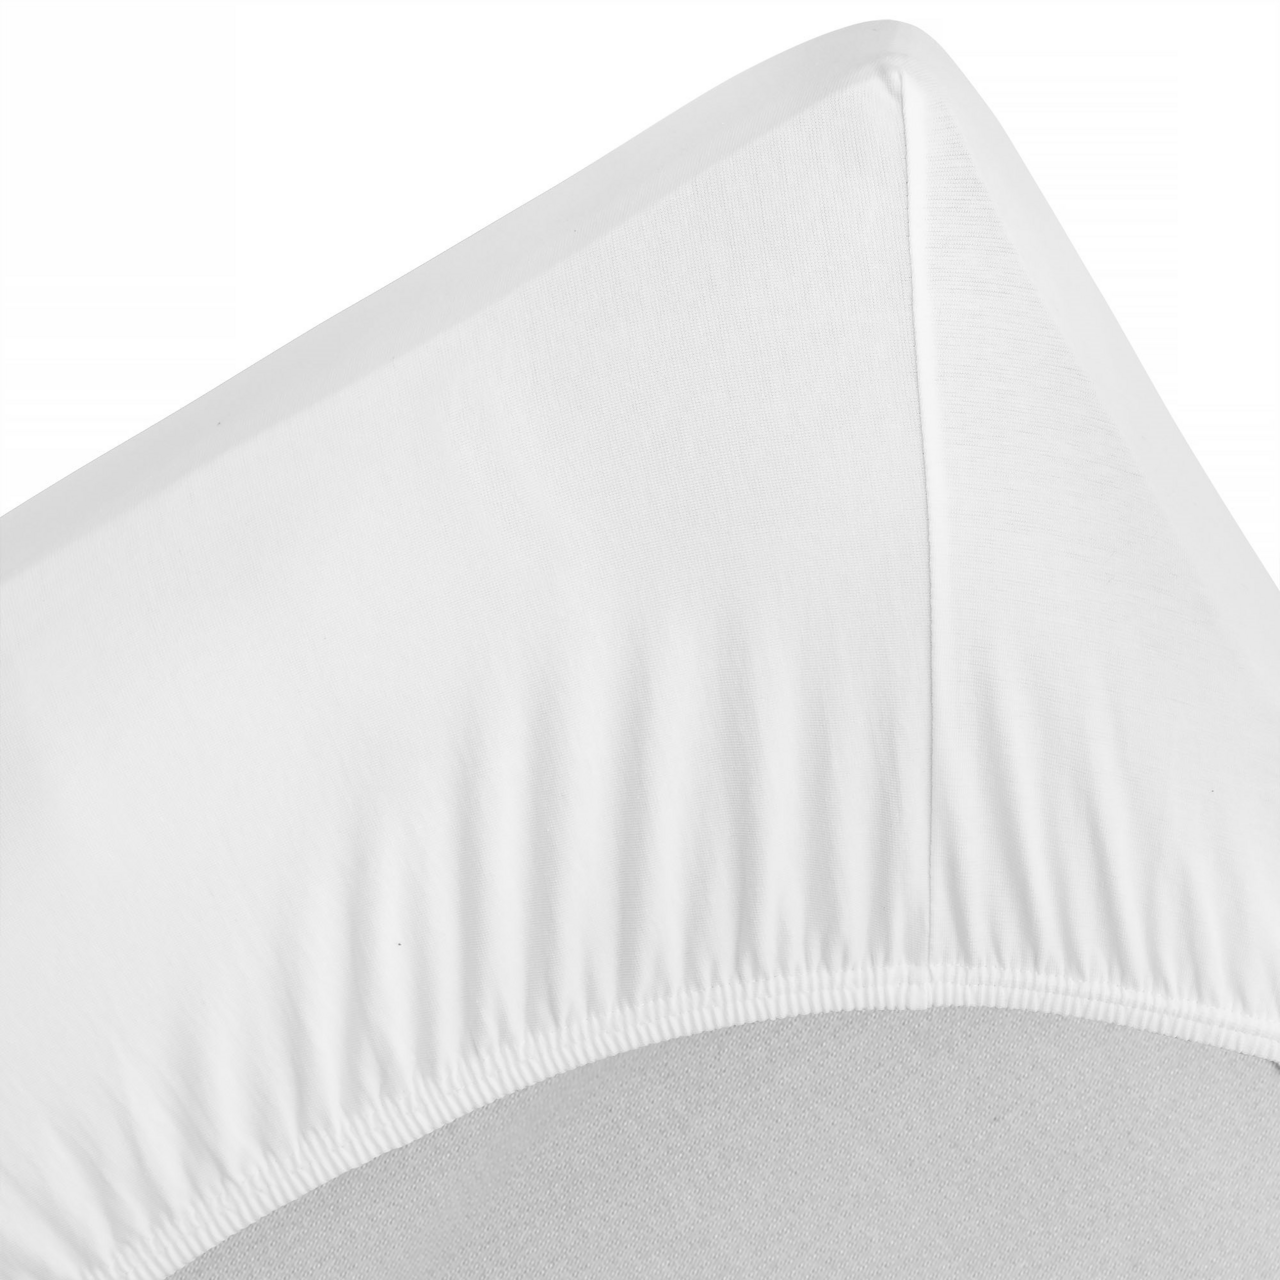 Mattress cover, fitted sheet 160x200 cm, White